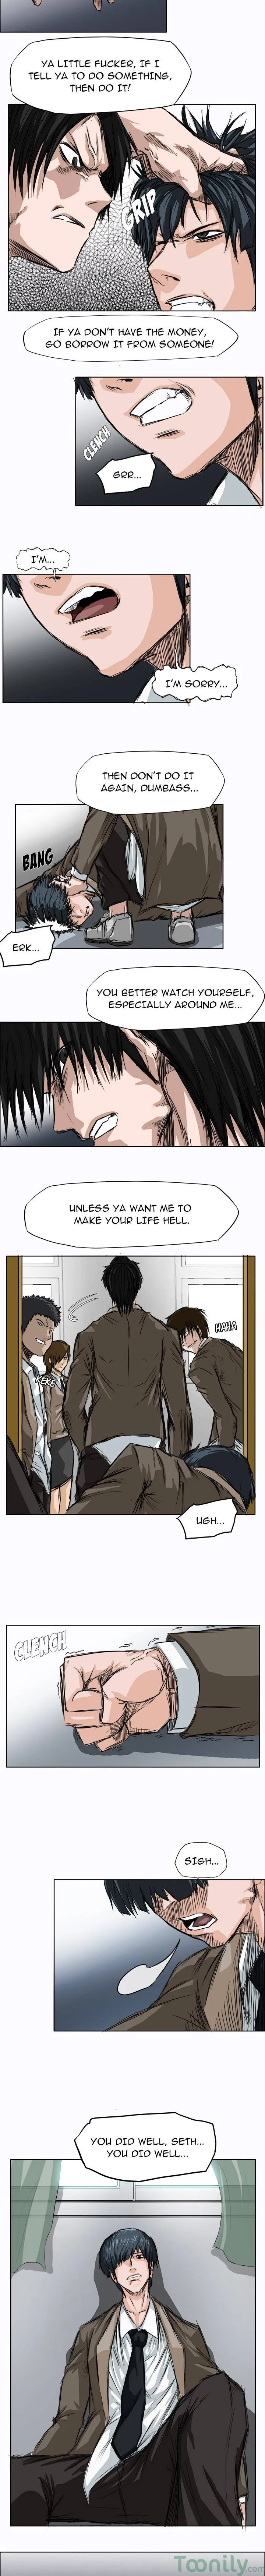 Boss in School Chapter 3 page 7